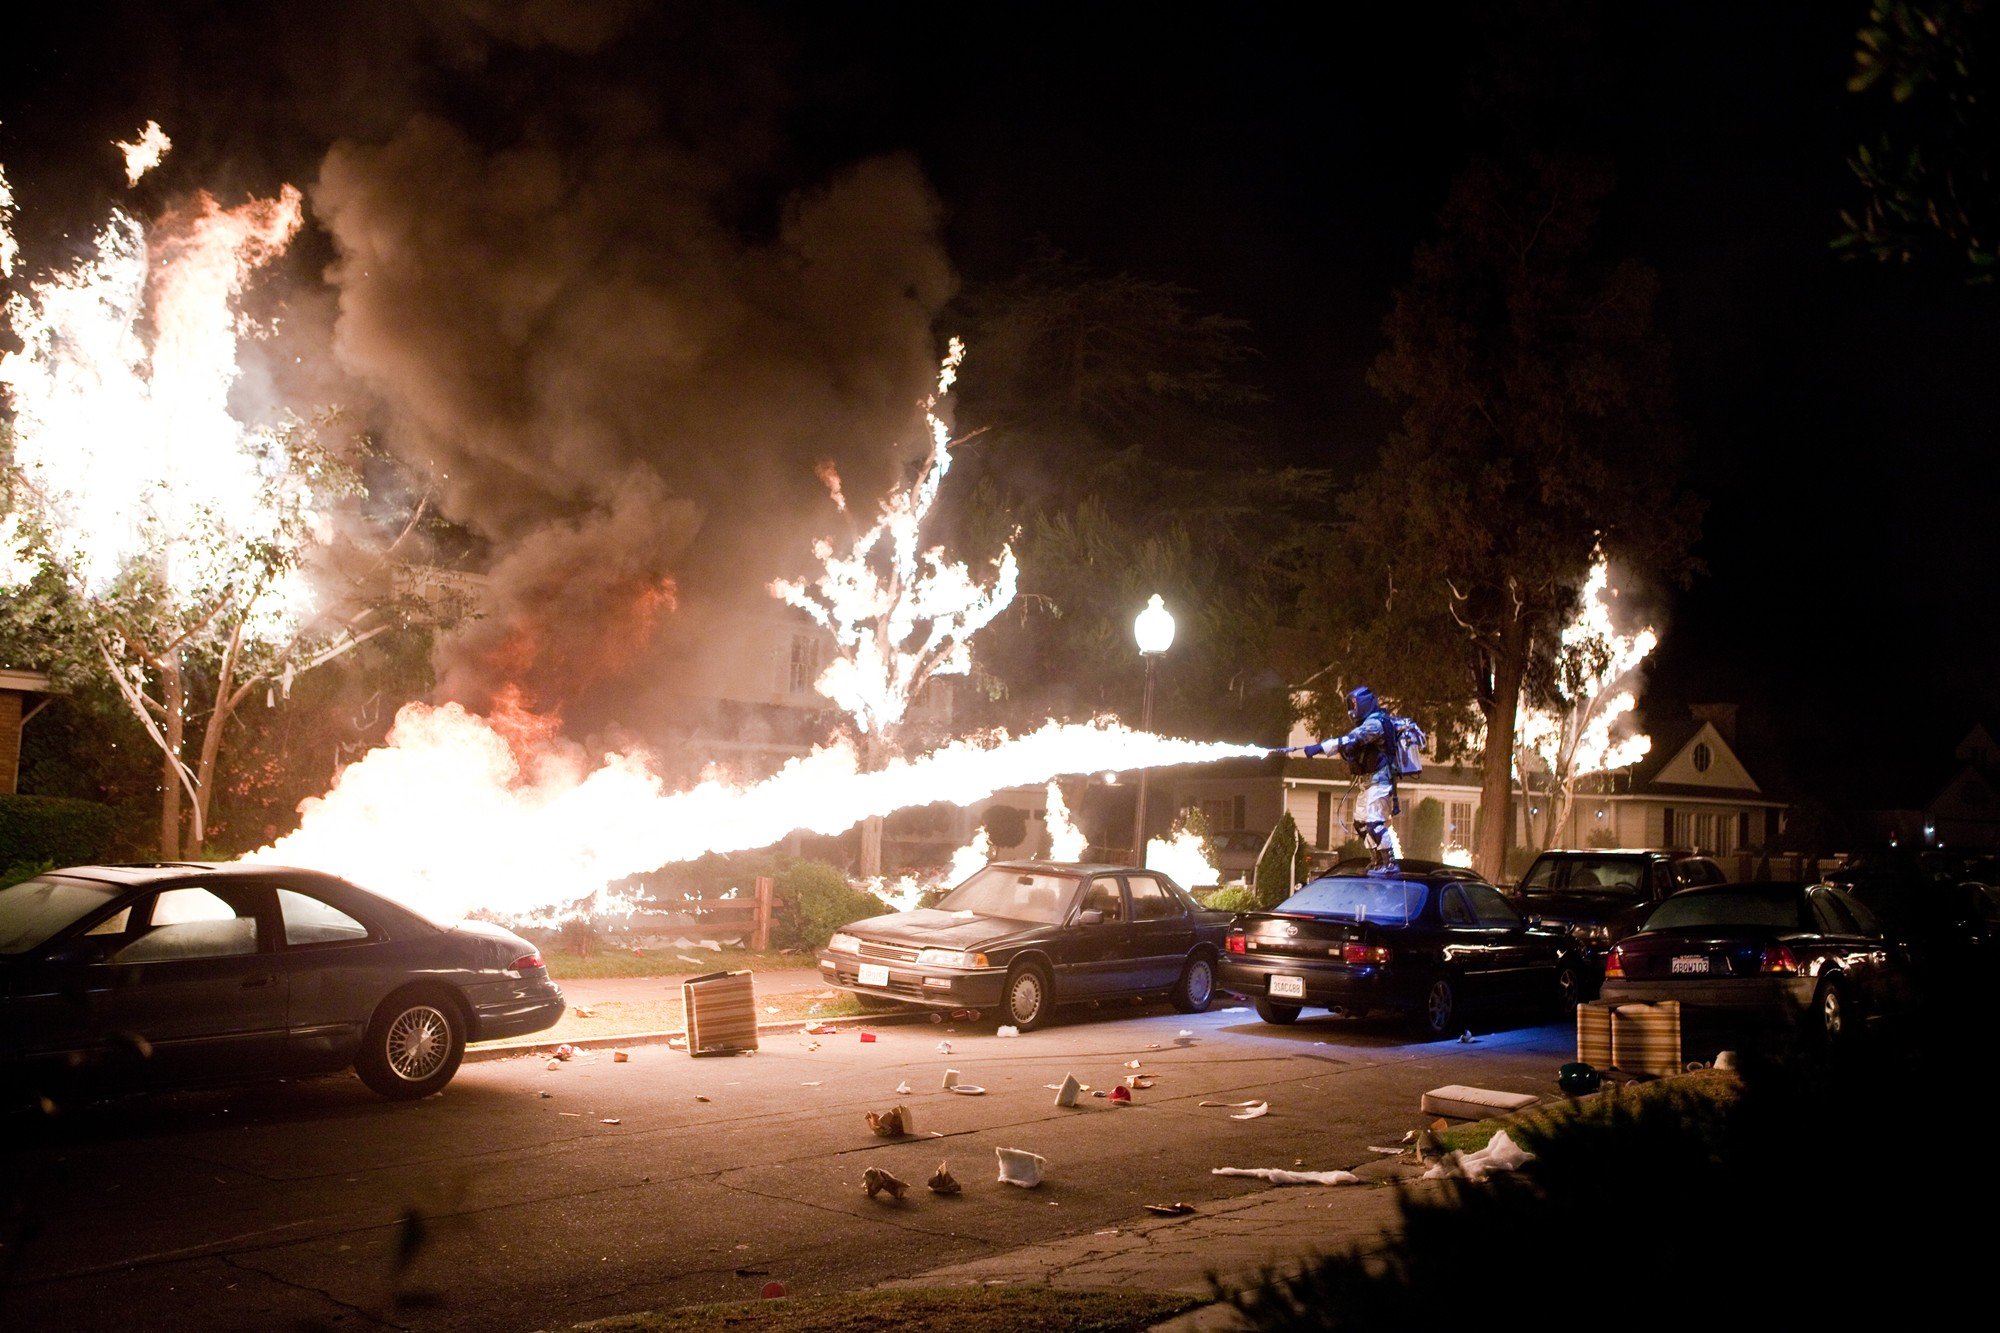 A scene from Warner Bros. Pictures' Project X (2012)